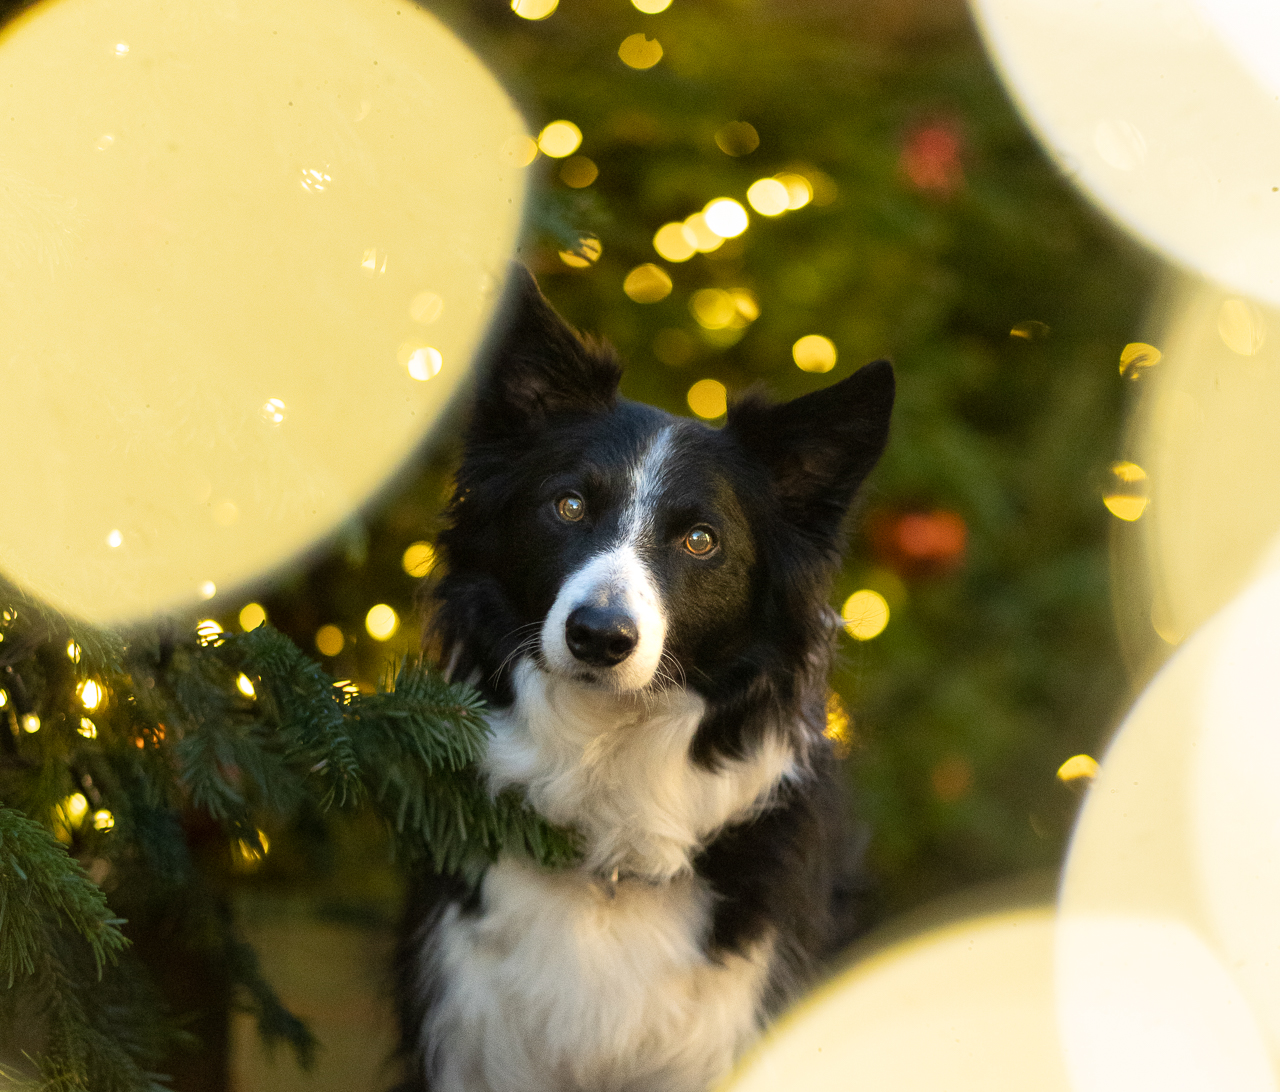 A border collie in a Christmas scene with pale hazy eyes from editing